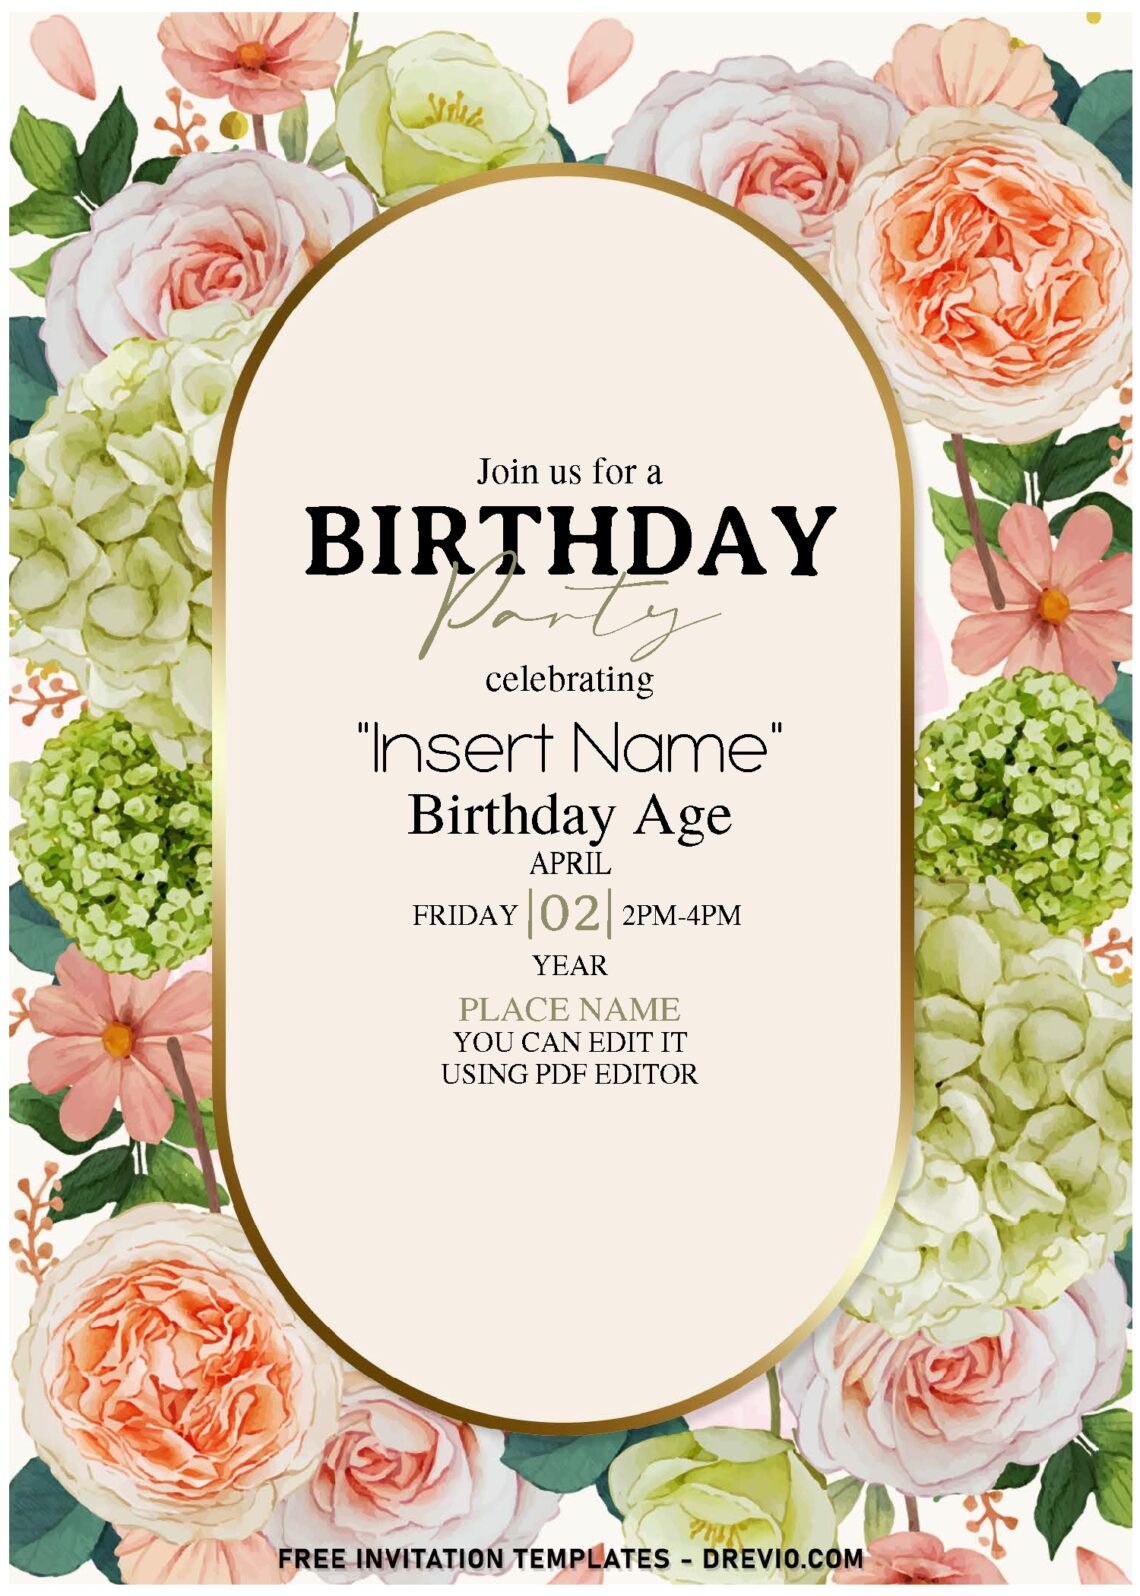 (Free Editable PDF) Darling Papery Blooms Birthday Invitation Templates with watercolor peony